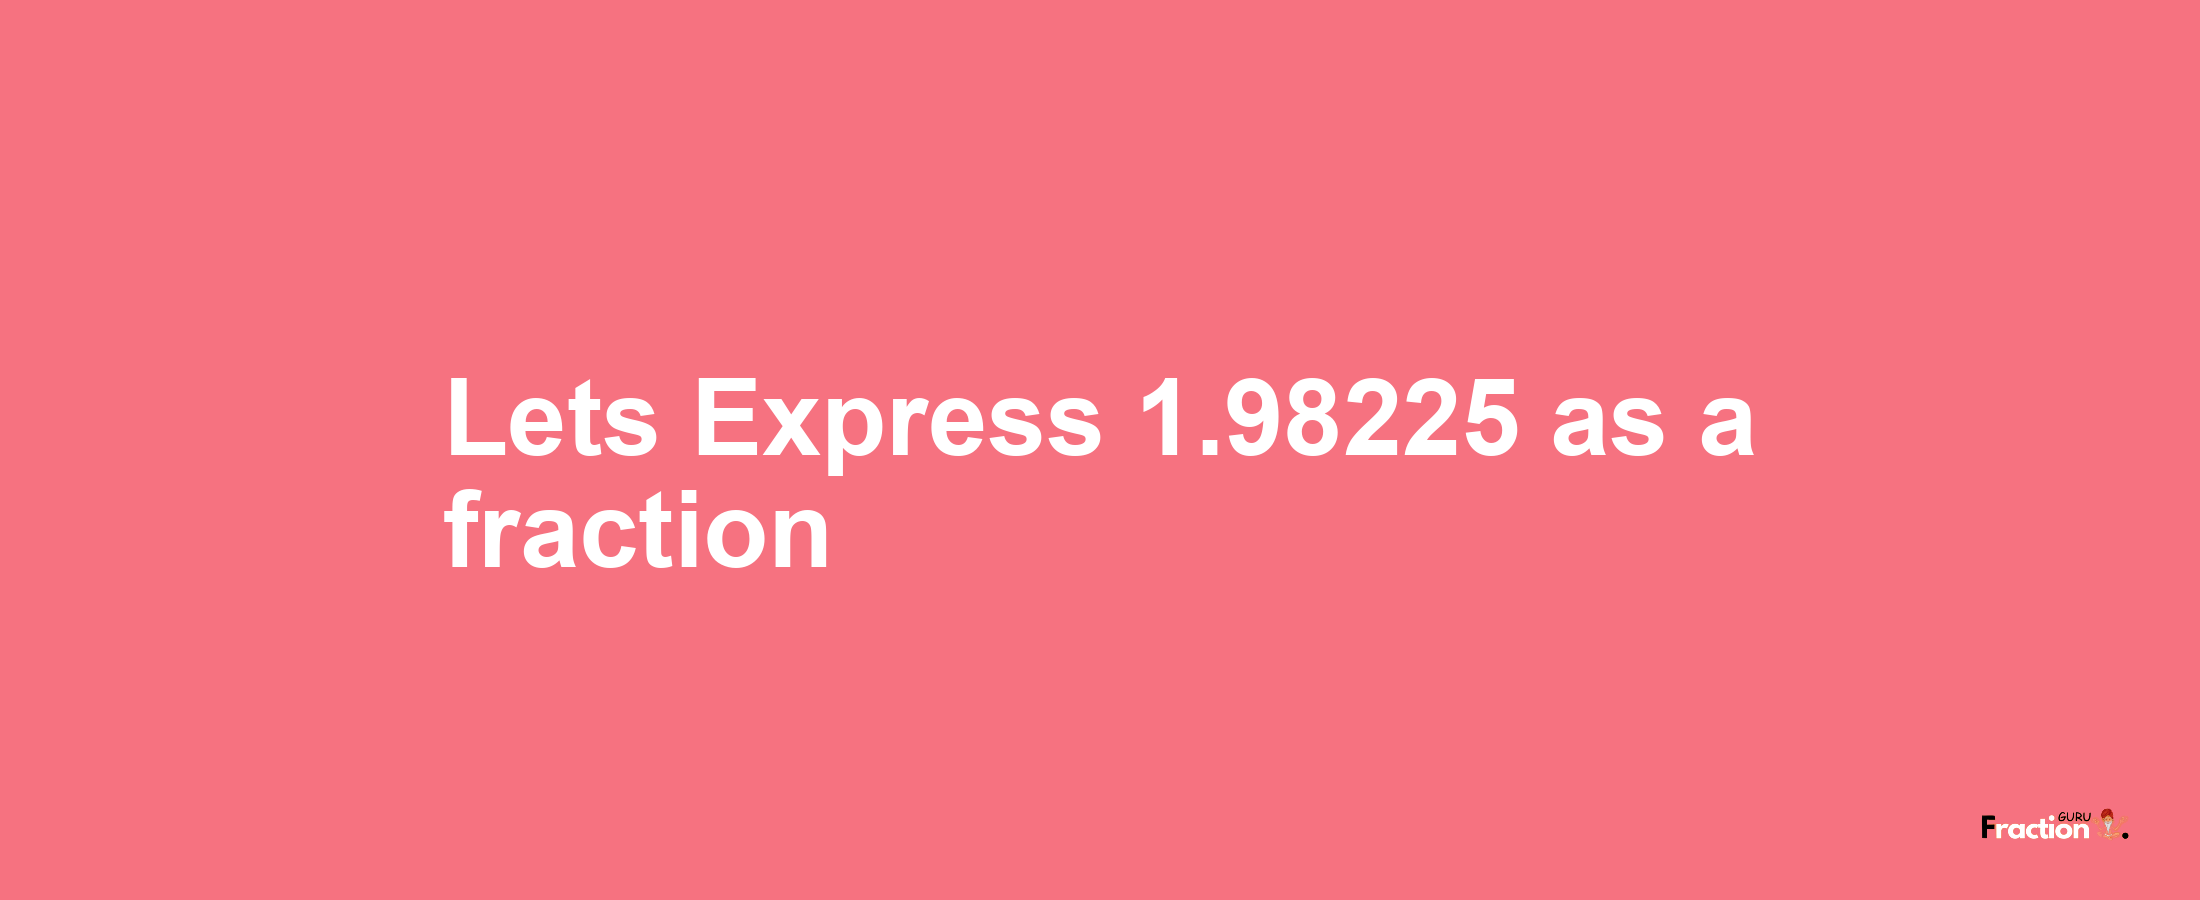 Lets Express 1.98225 as afraction